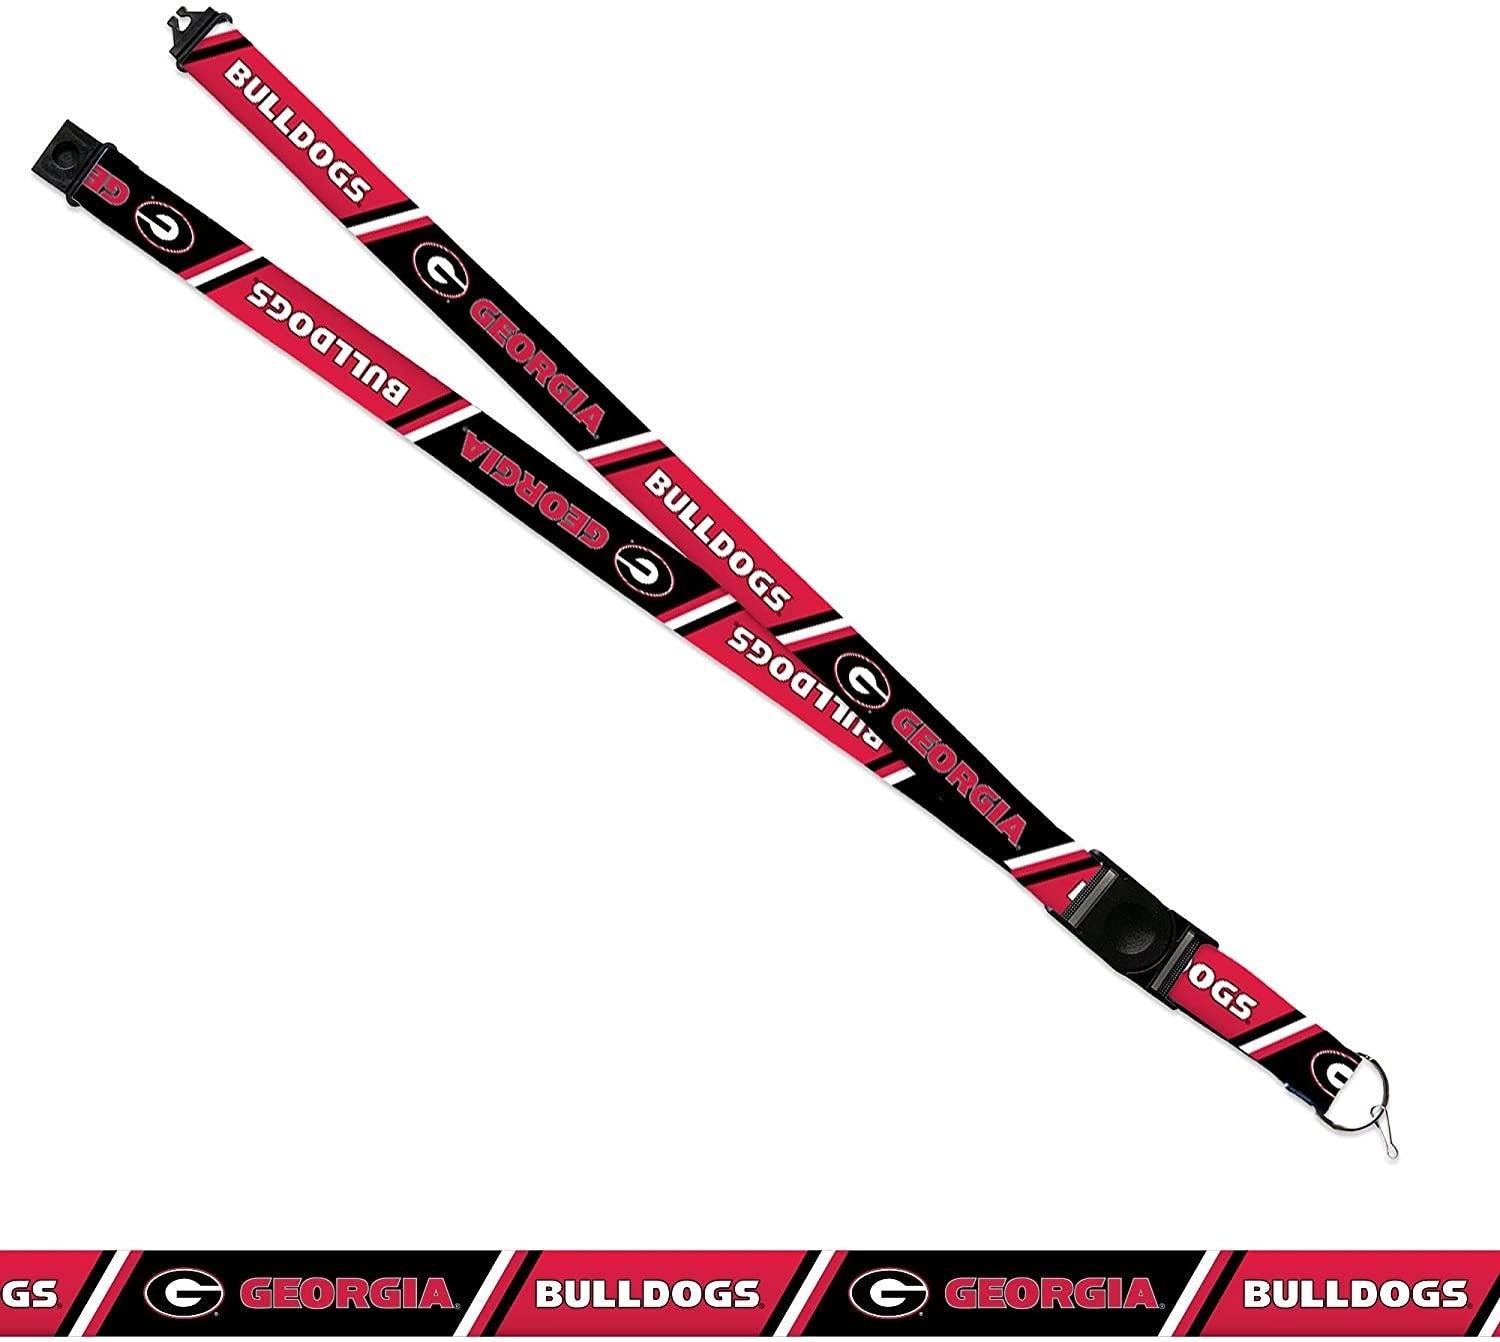 University of Georgia Bulldogs Lanyard Keychain Double Sided 18 Inch Button Clip Safety Breakaway